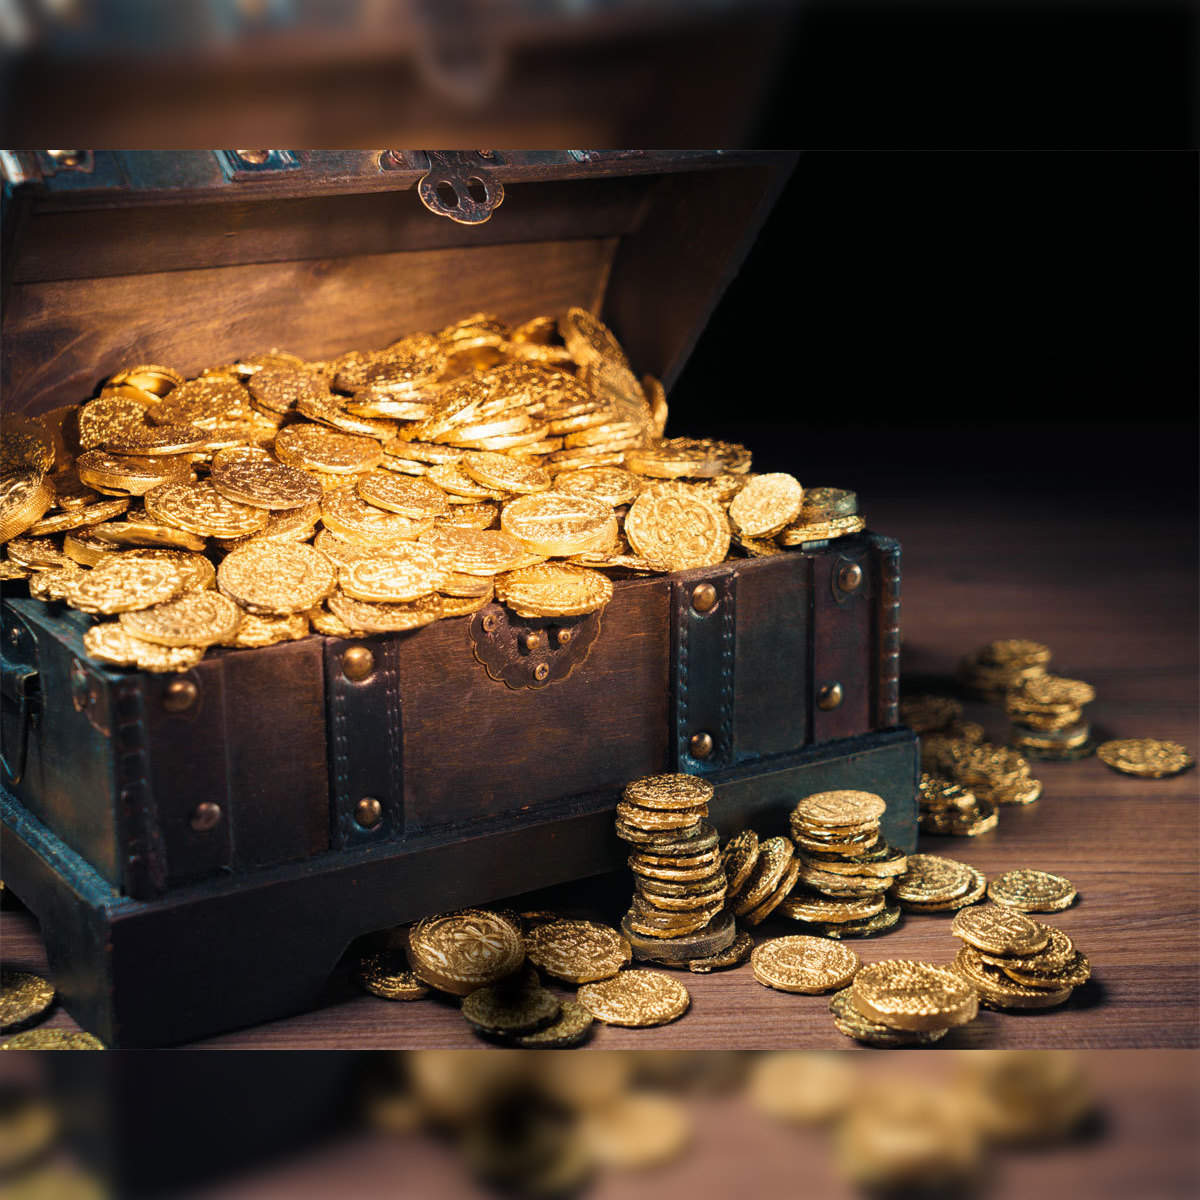 8 Things to Know Before You Invest in Gold, Investing